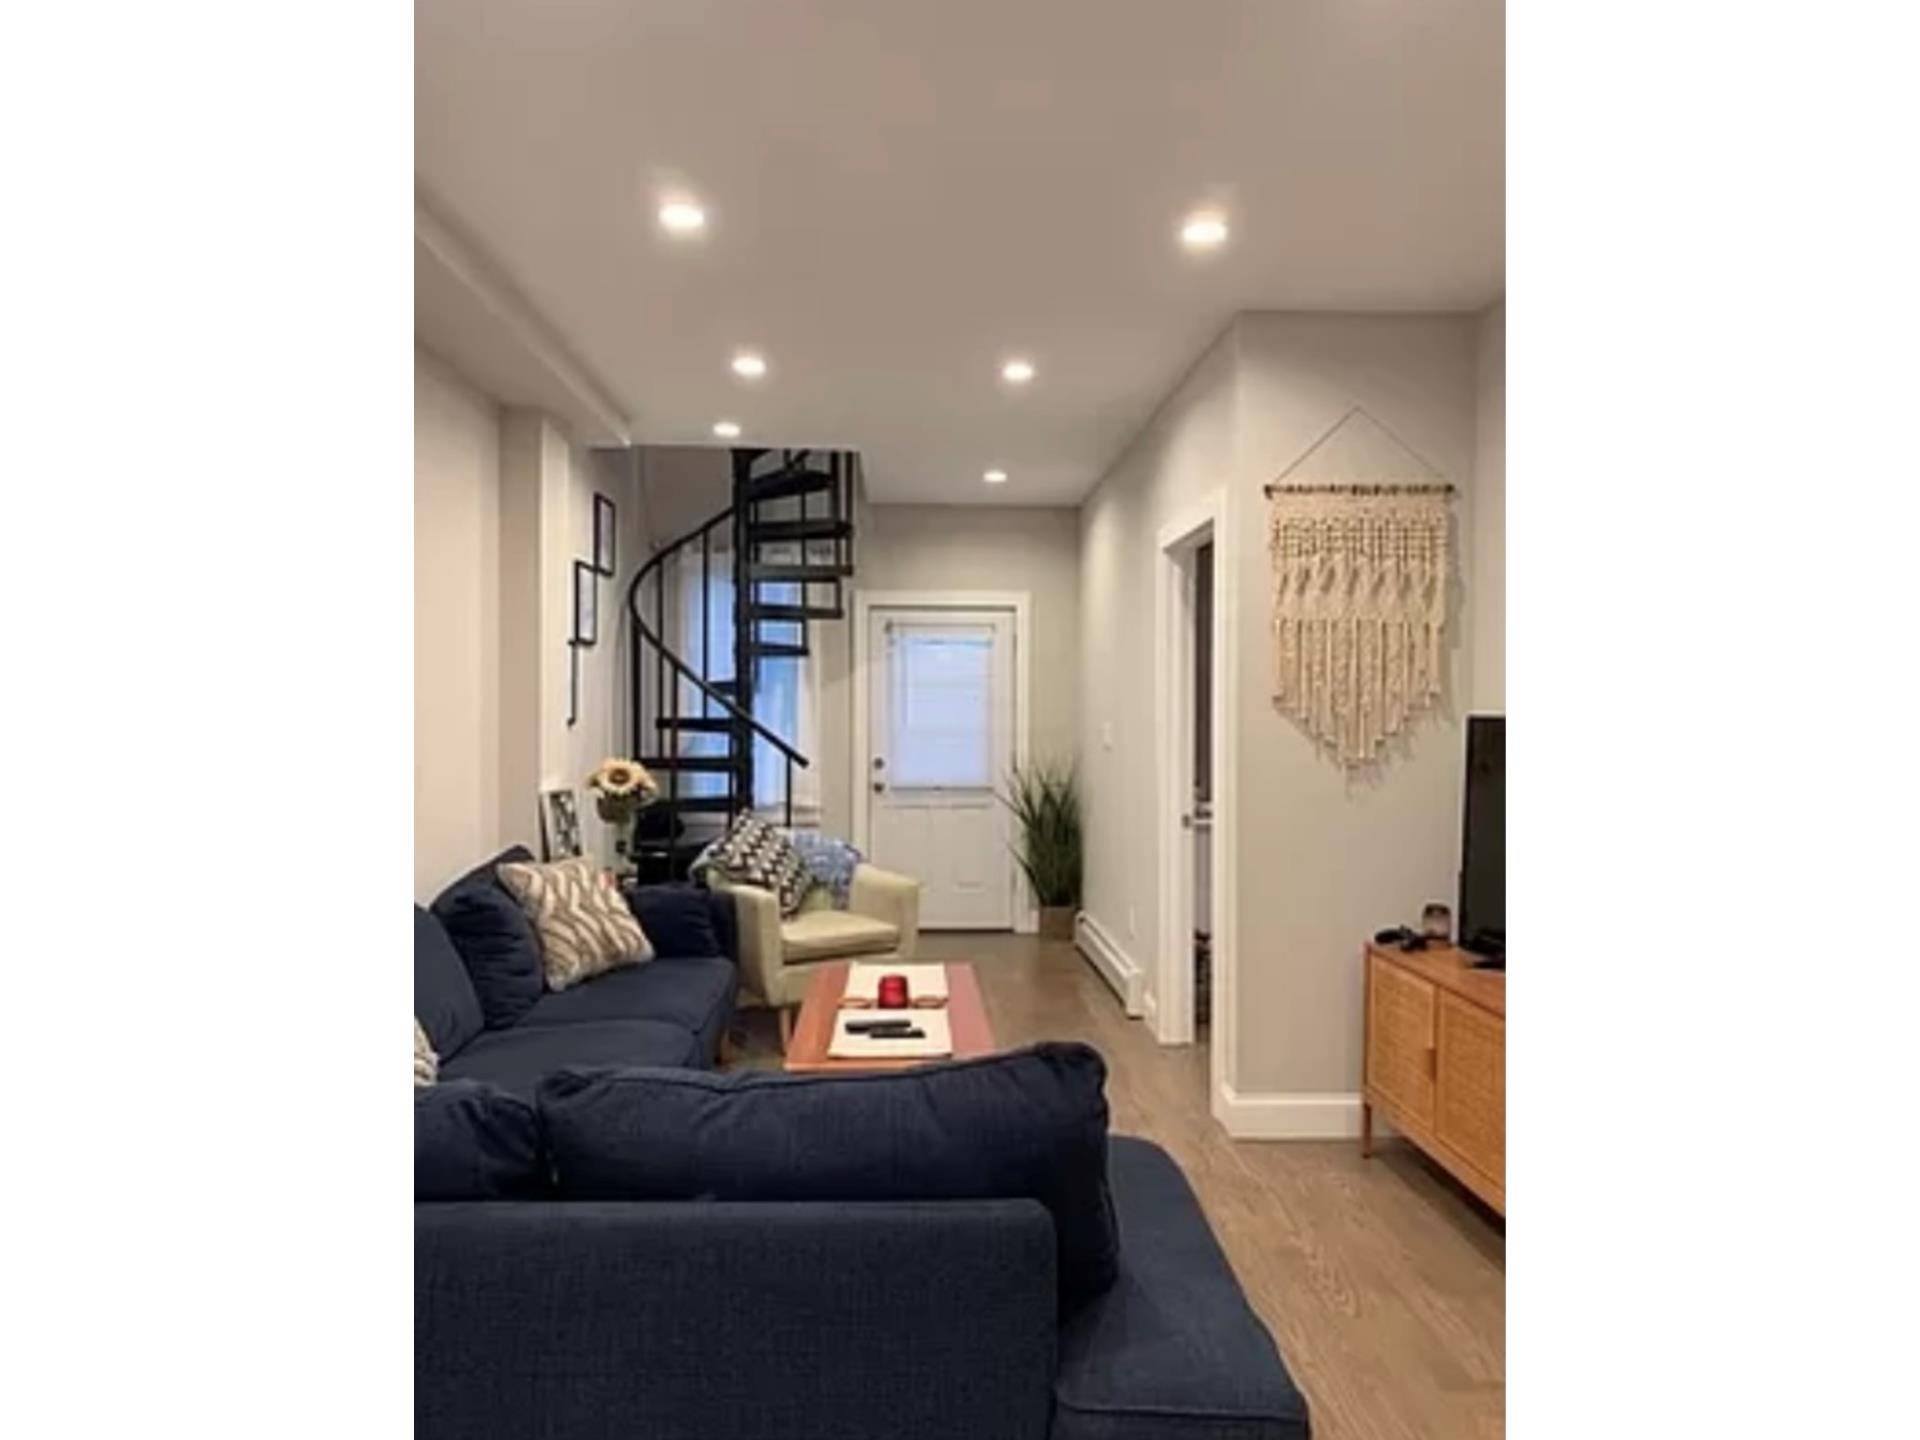 Amazing opportunity to rent this modern and trendy 3 BR 2 BA duplex in prime Astoria location.